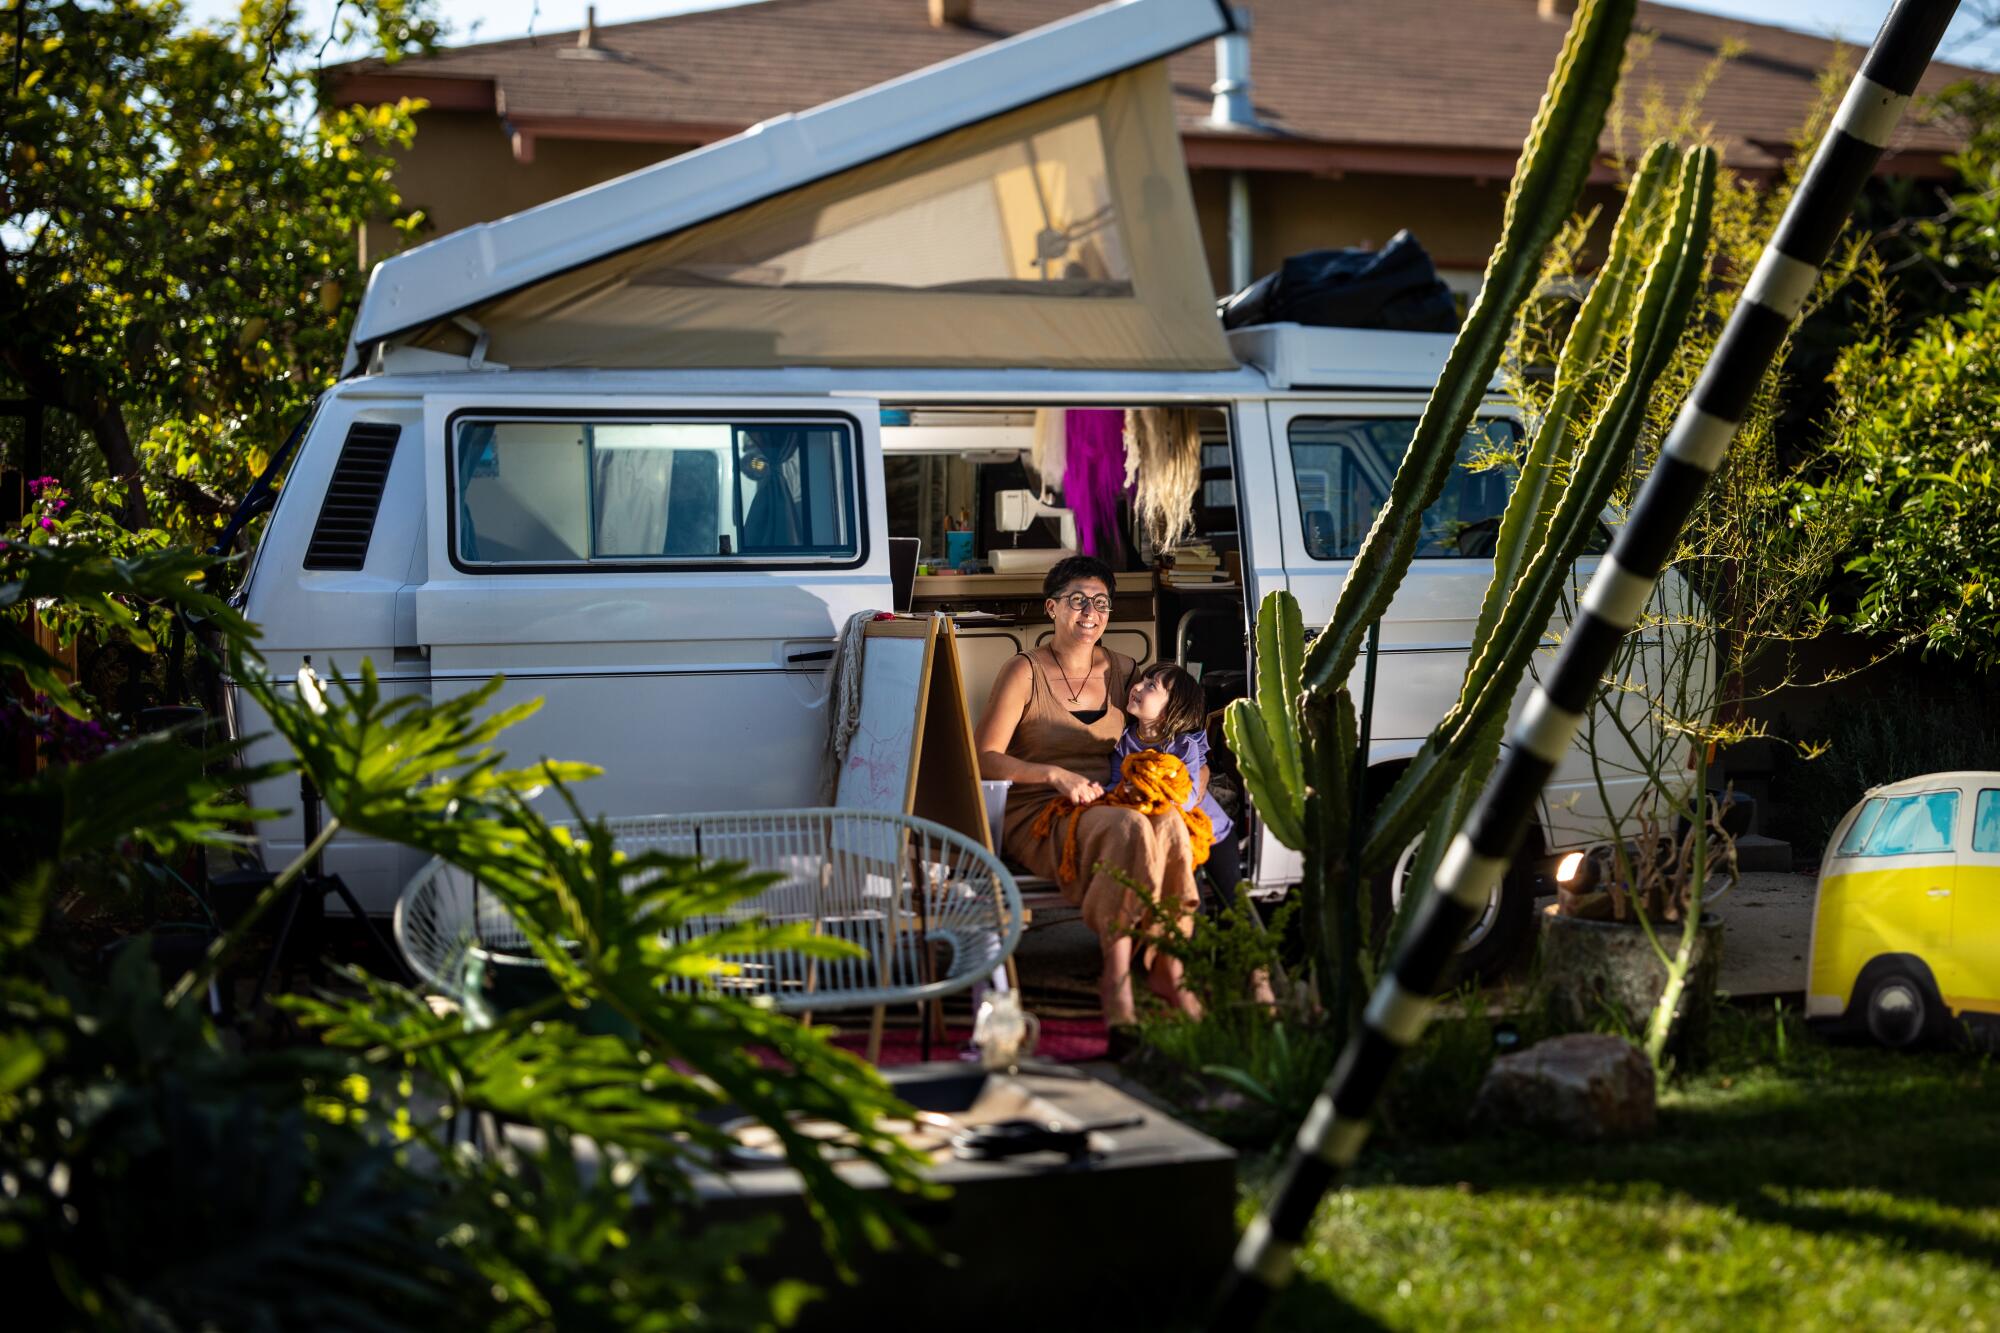 Artist Tanya Agui?iga has been working out of a Volkswagen camper in her yard since coronavirus struck